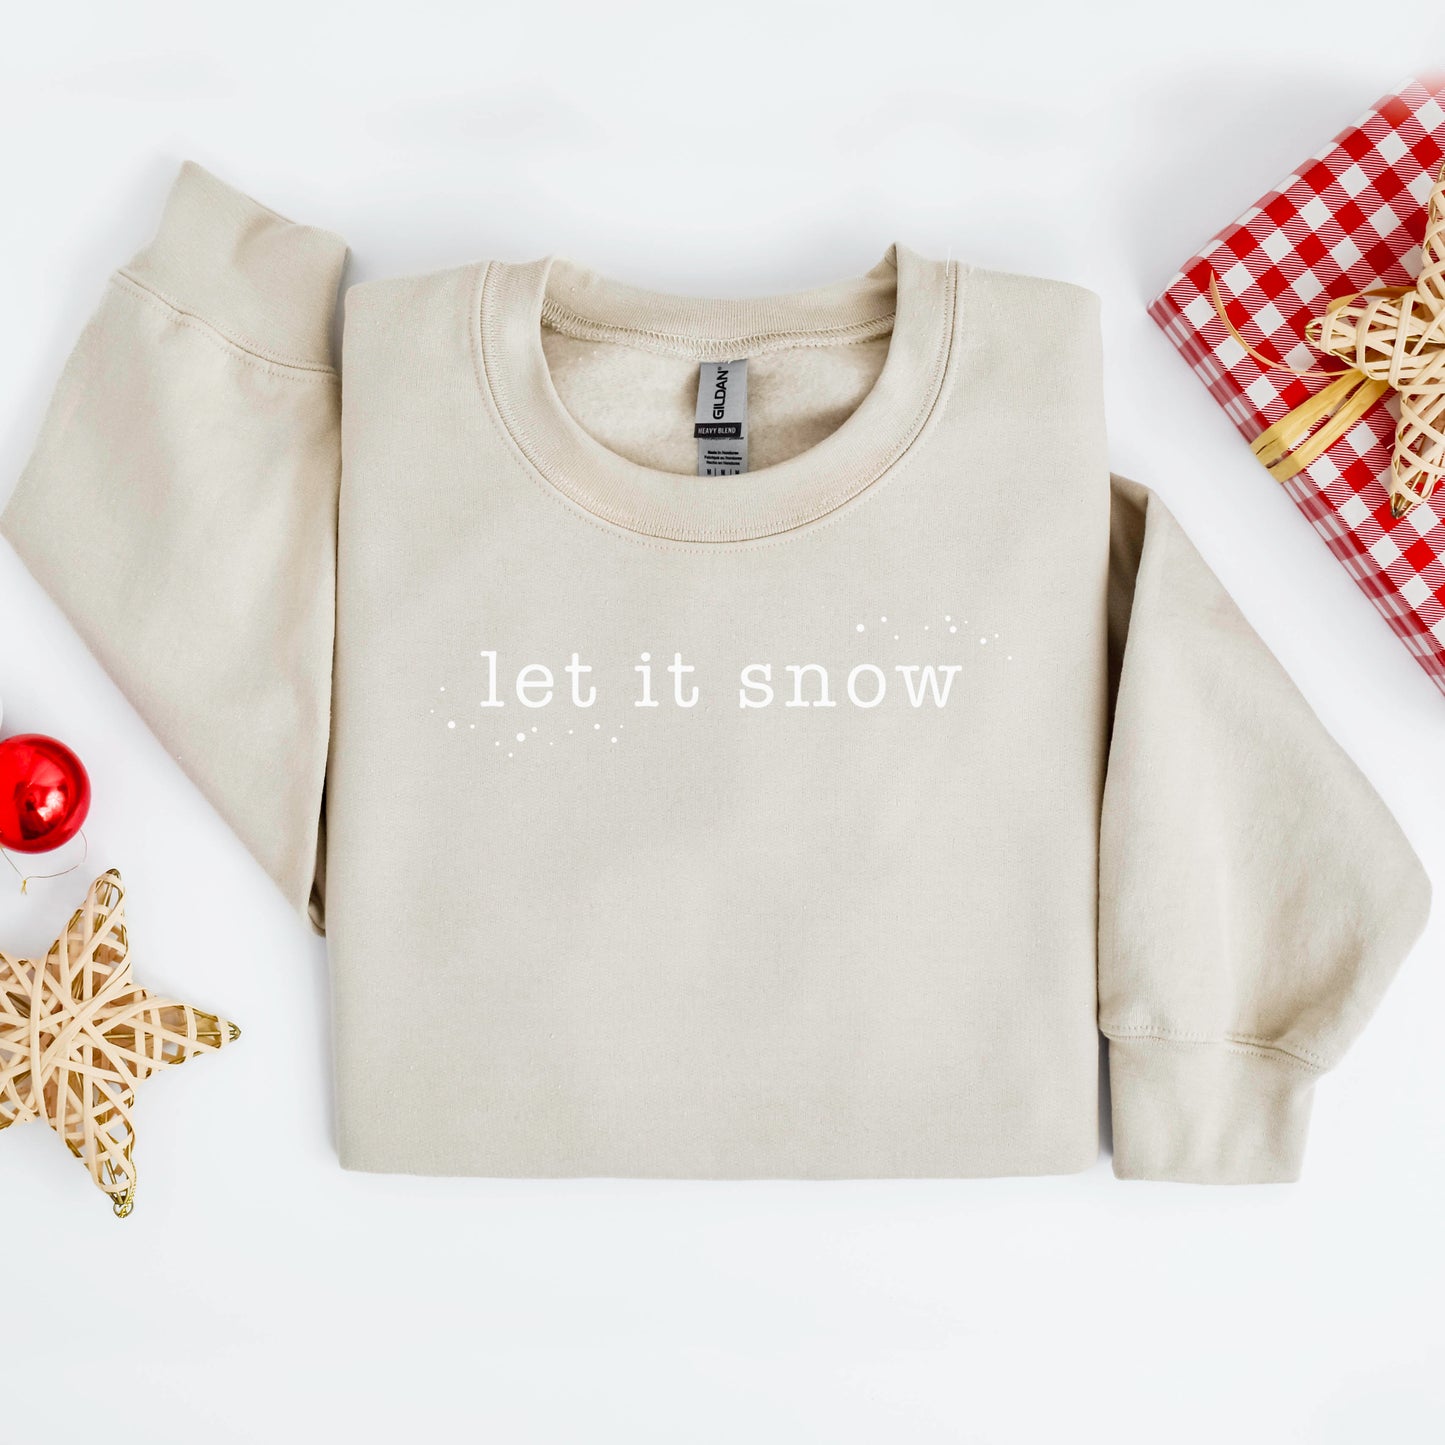 "Let It Snow" - Sand Sweatshirt (Adult Only)